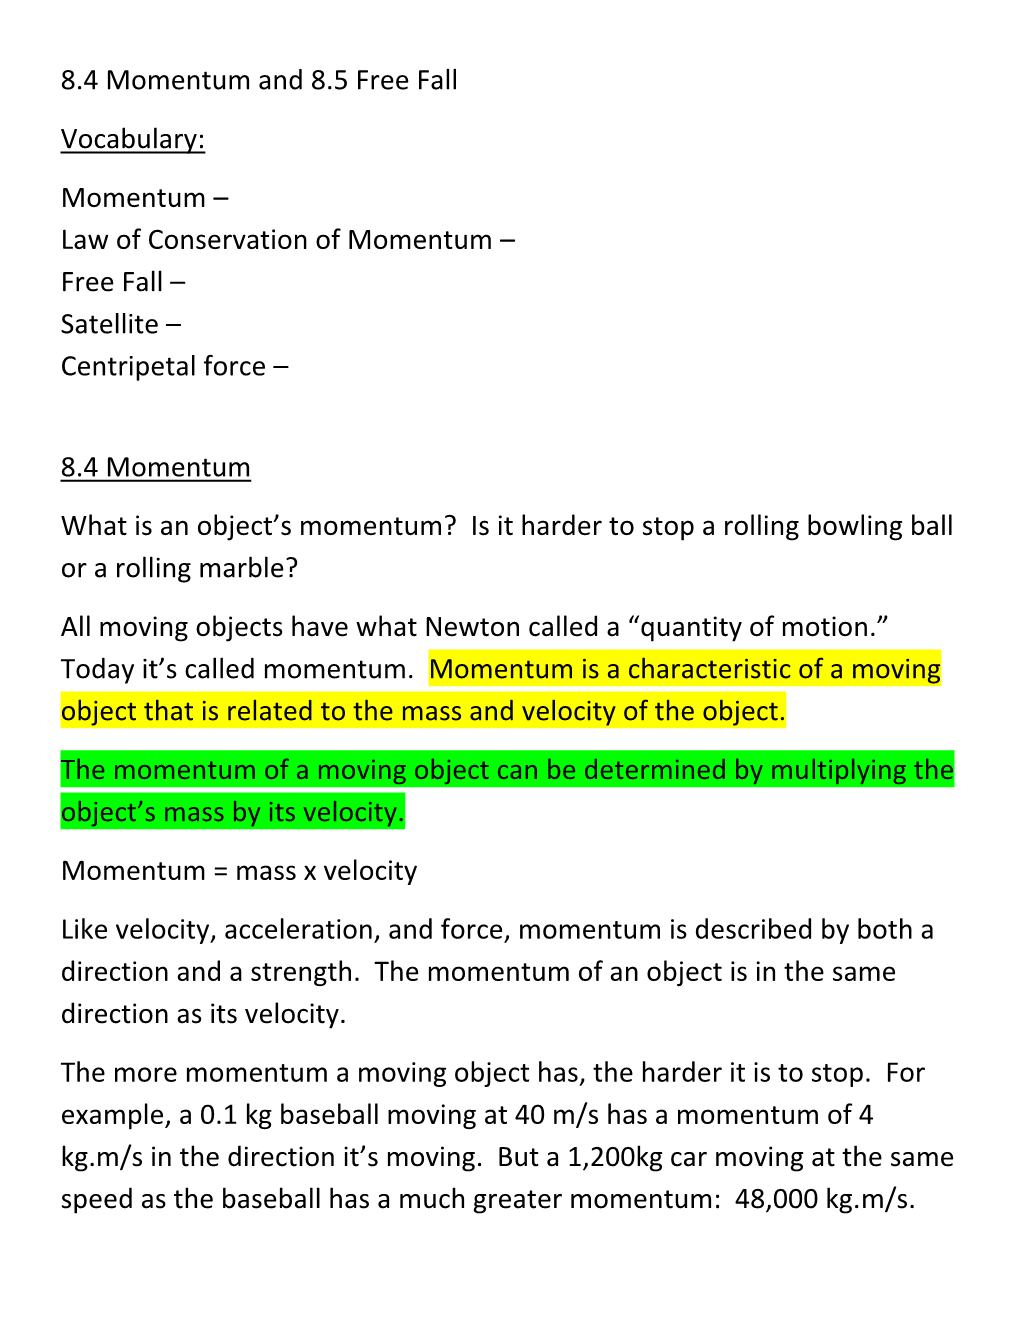 8.4 Momentum and 8.5 Free Fall Vocabulary: Momentum – Law of Conservation of Momentum – Free Fall – Satellite – Centripetal Force –